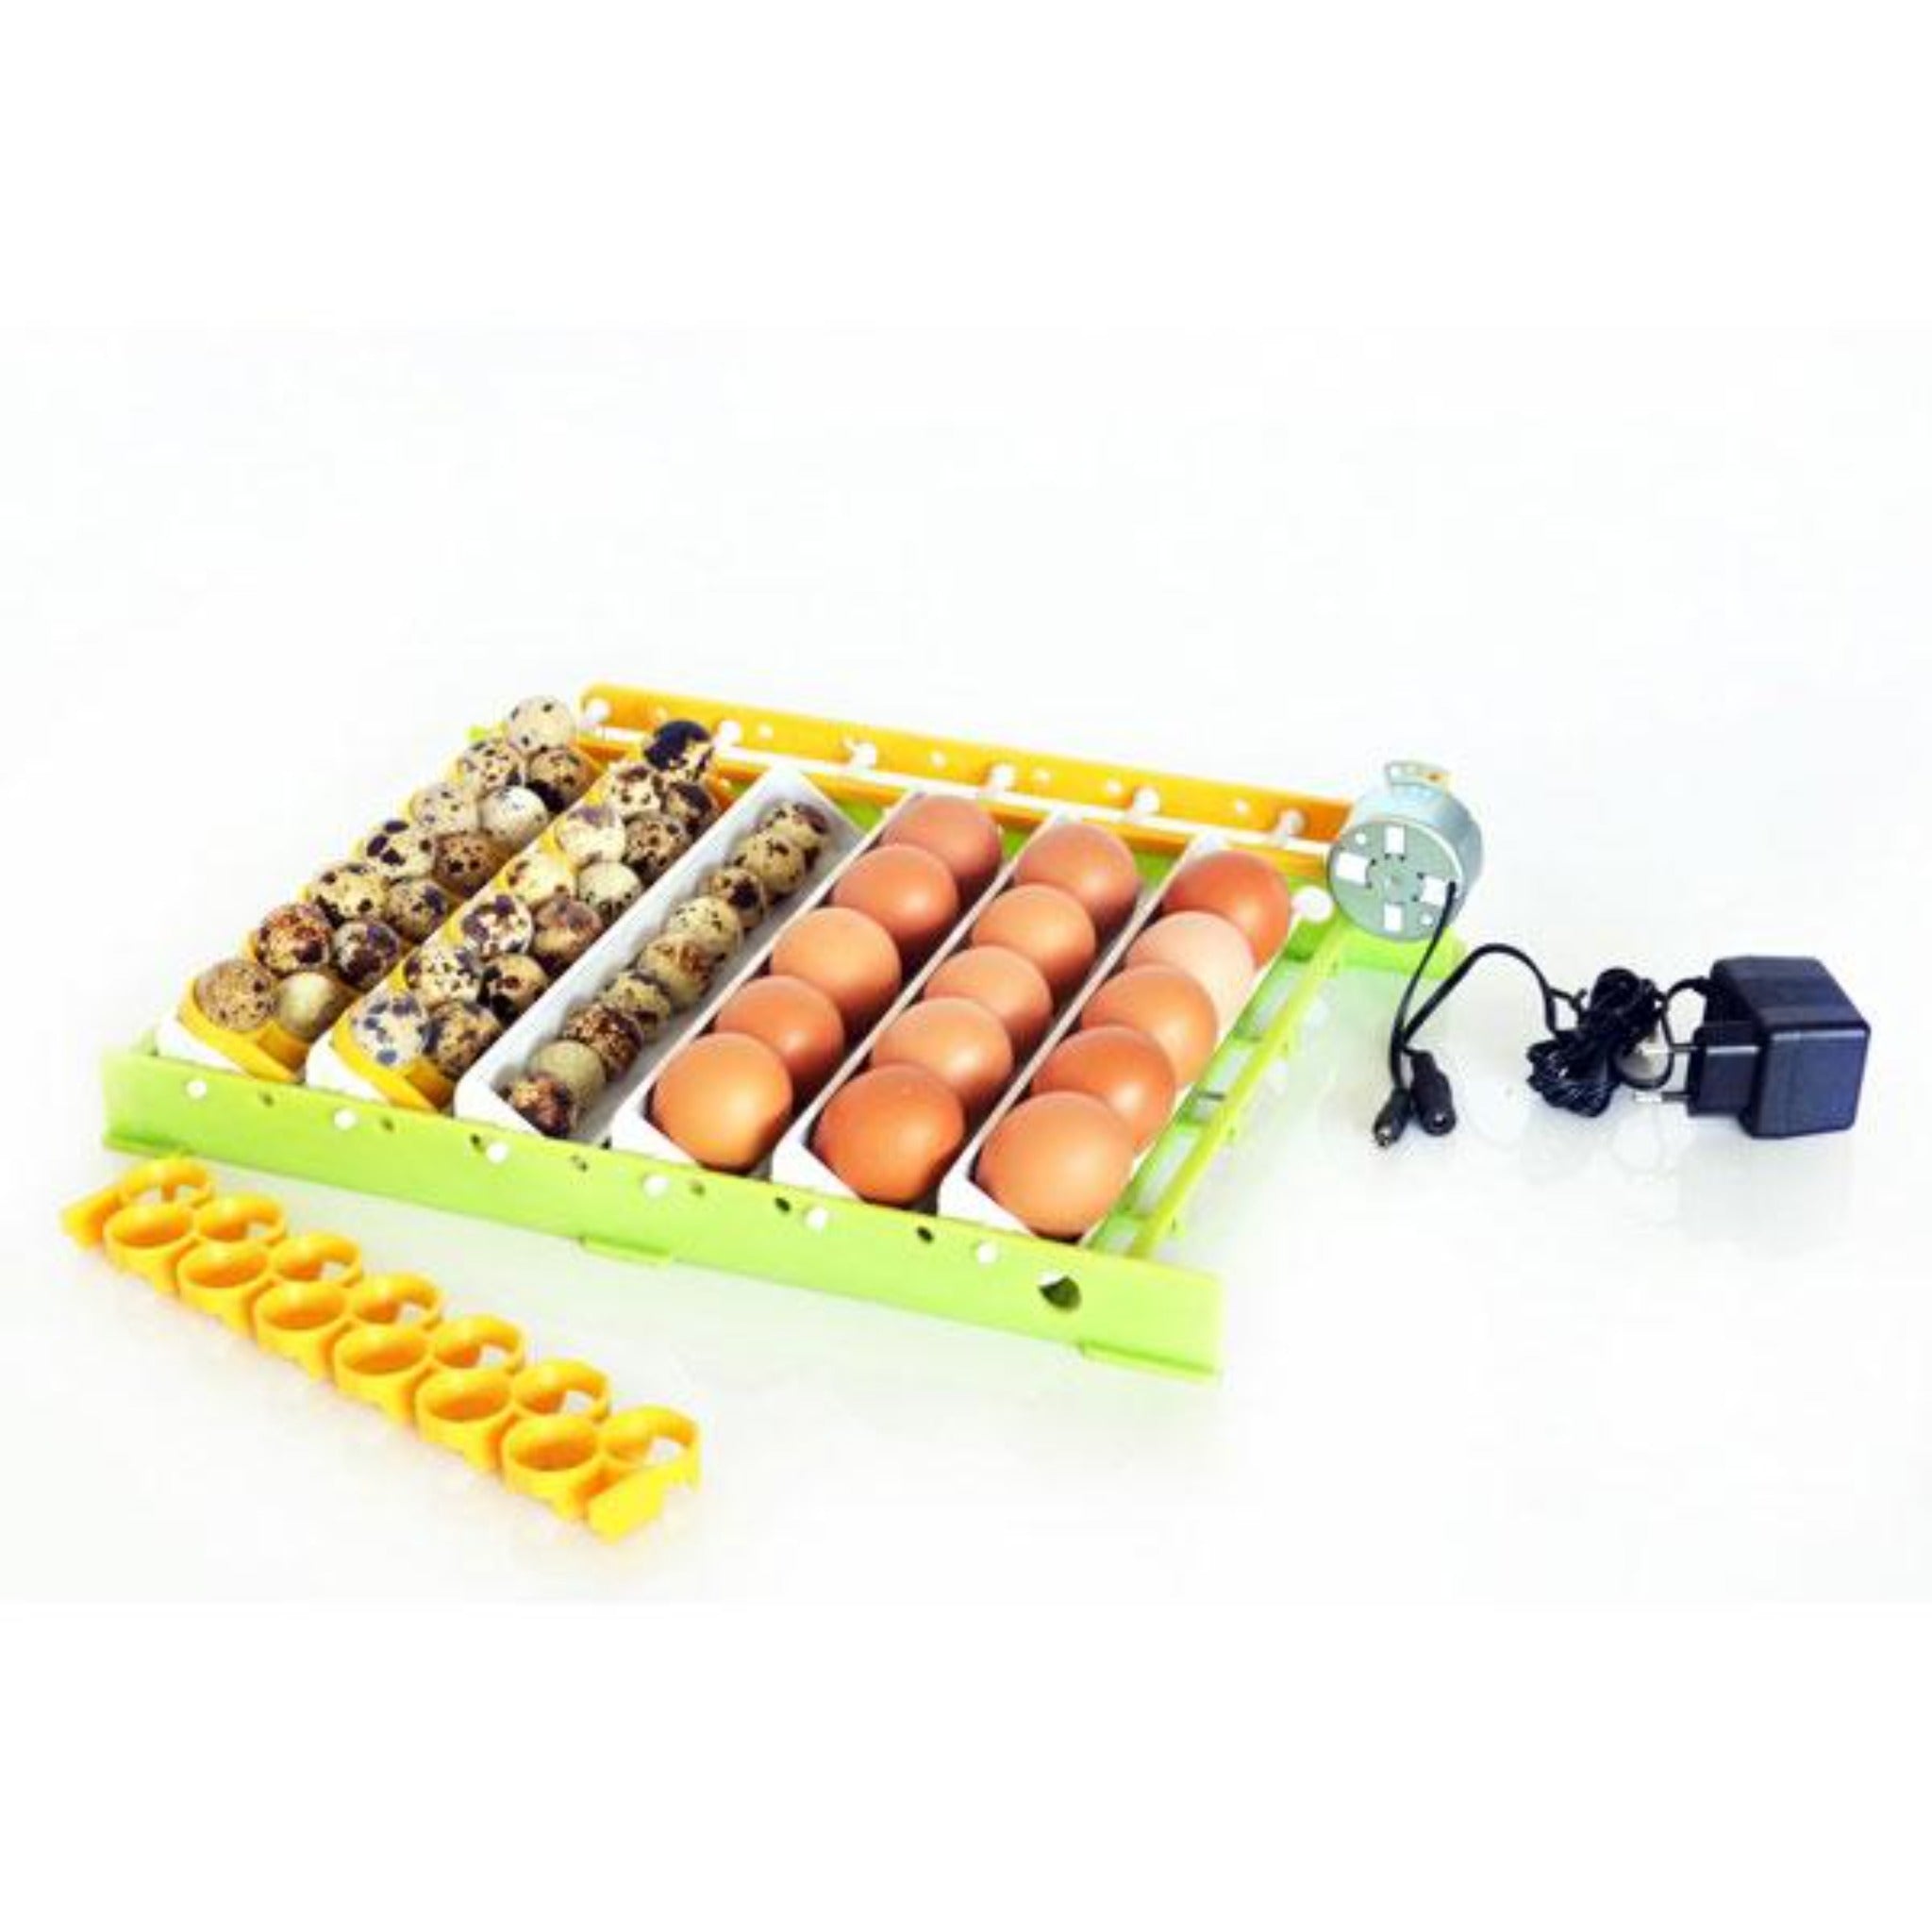 Hatching Time Cimuka. Automatic turning tray can be seen with chicken egg and quail eggs. Quail eggs are in special trays. Motor can be seen with power plug visible.